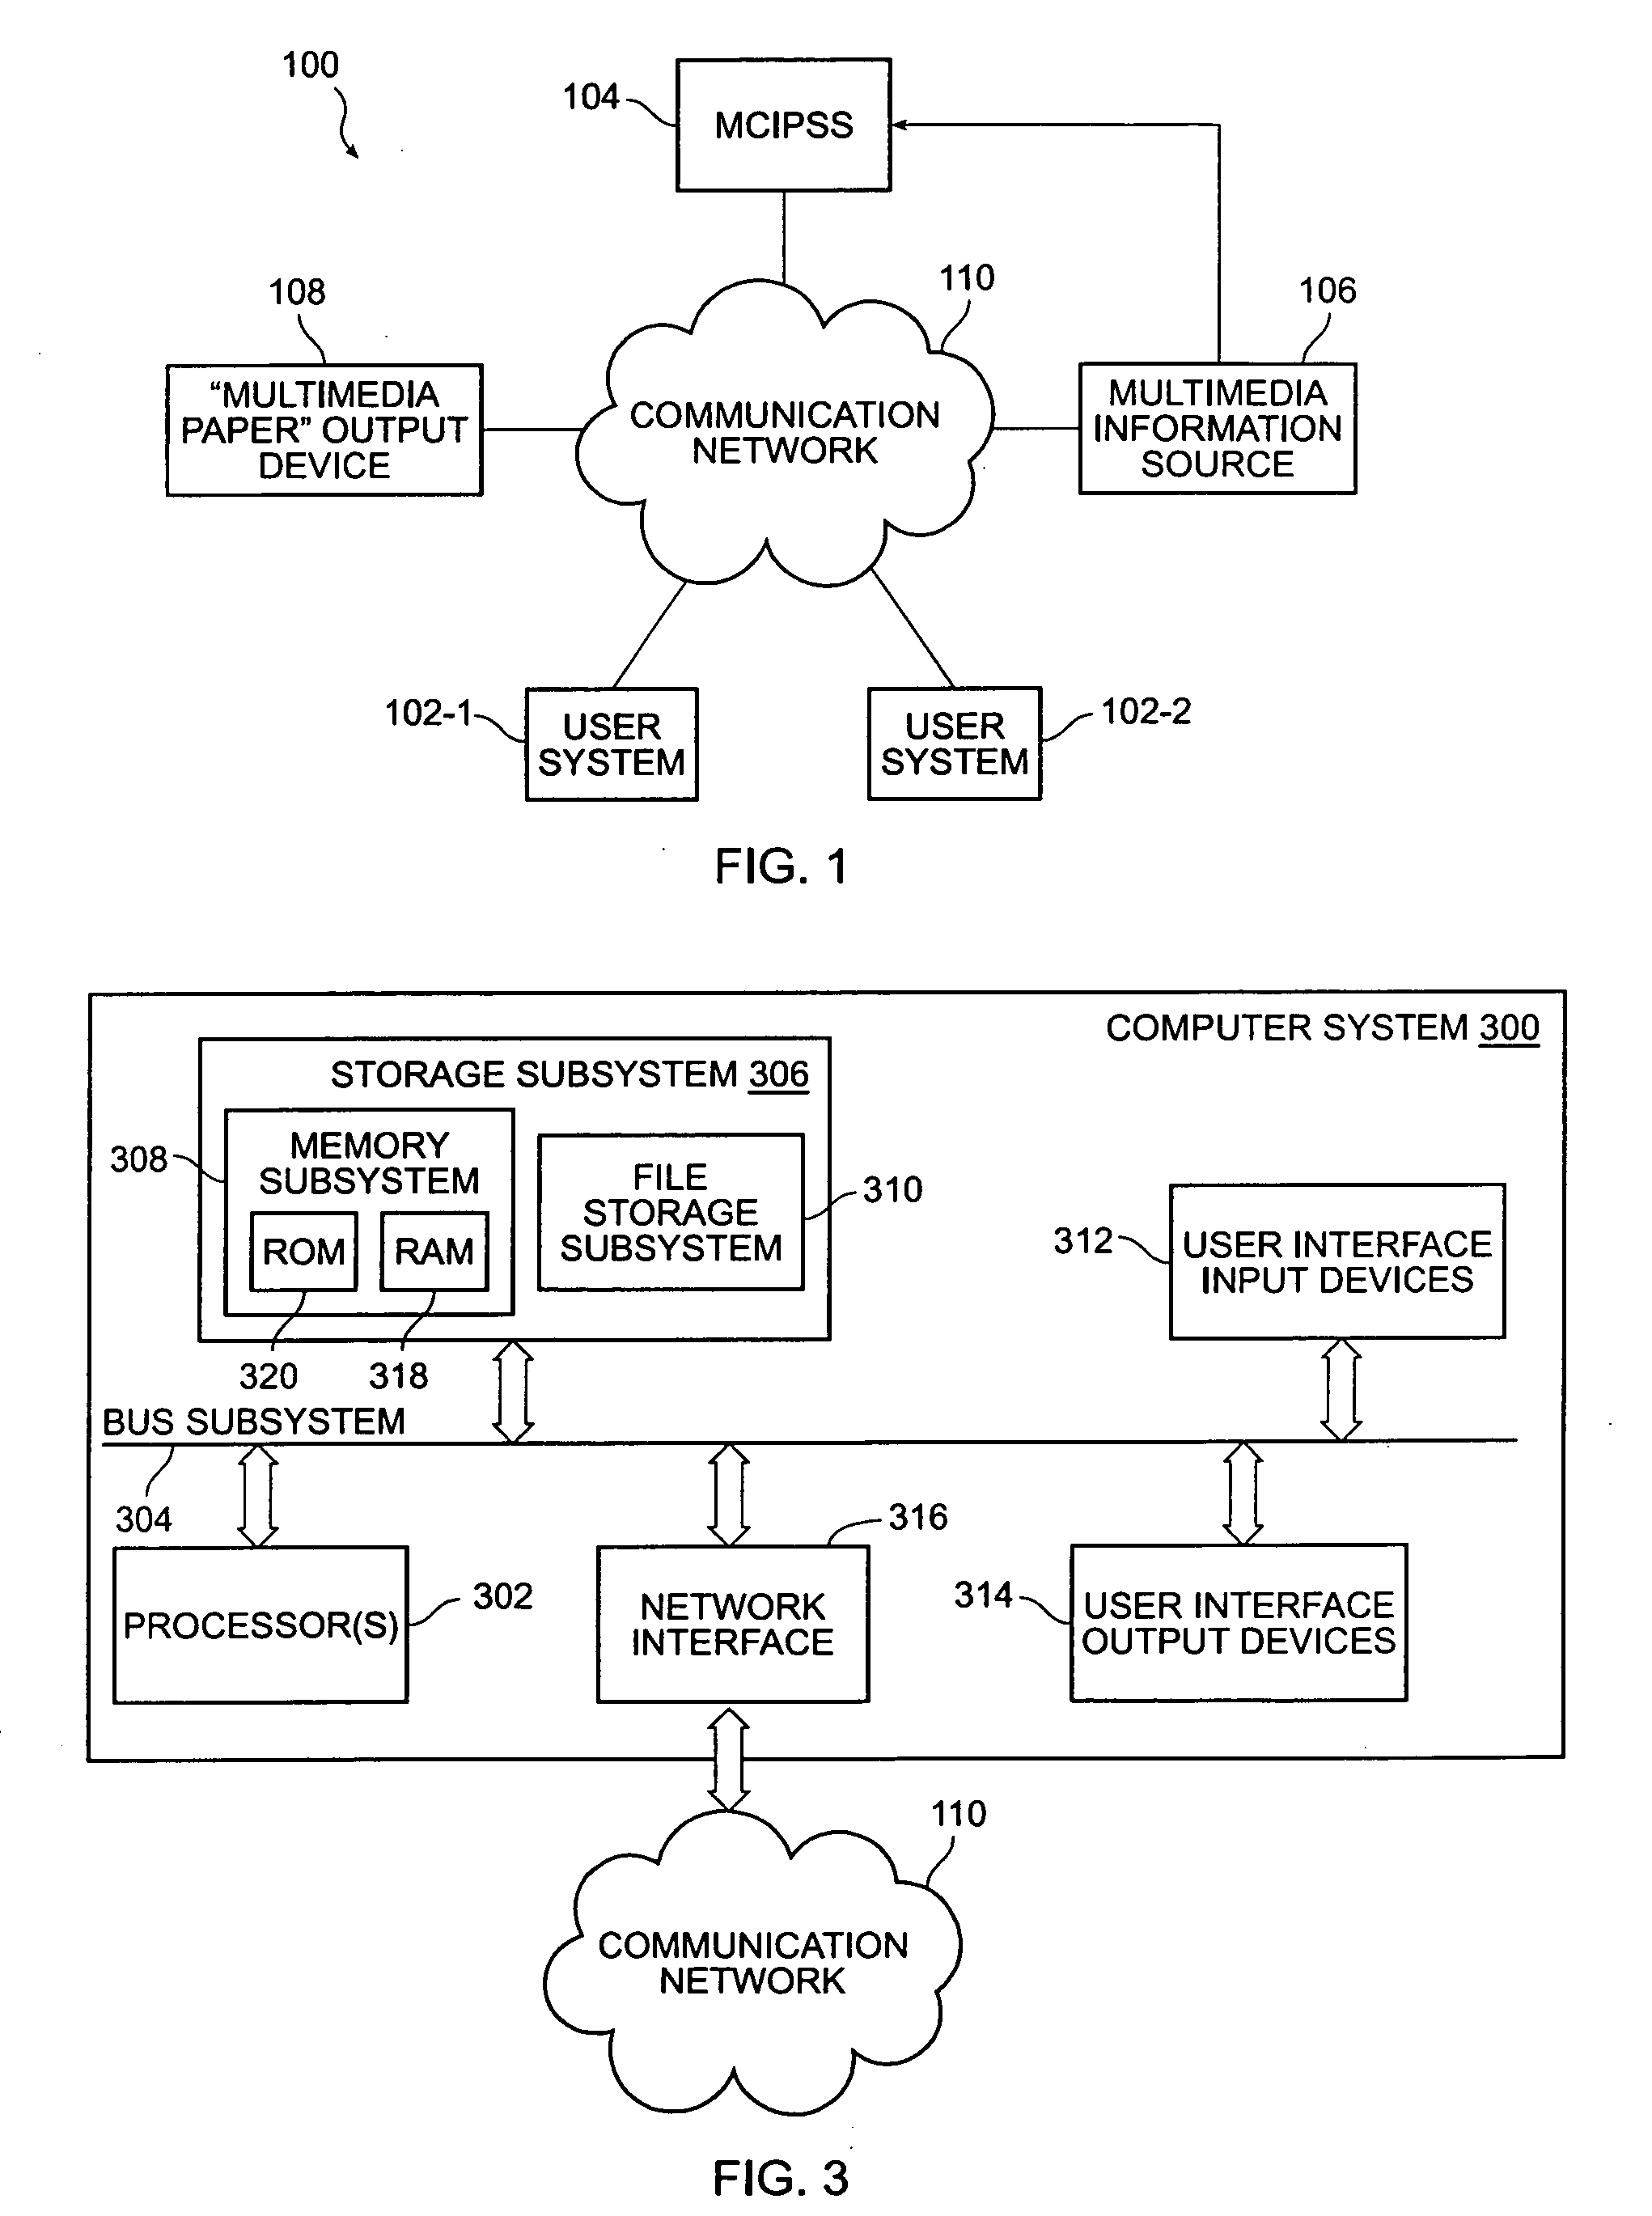 Paper-based interface for multimedia information